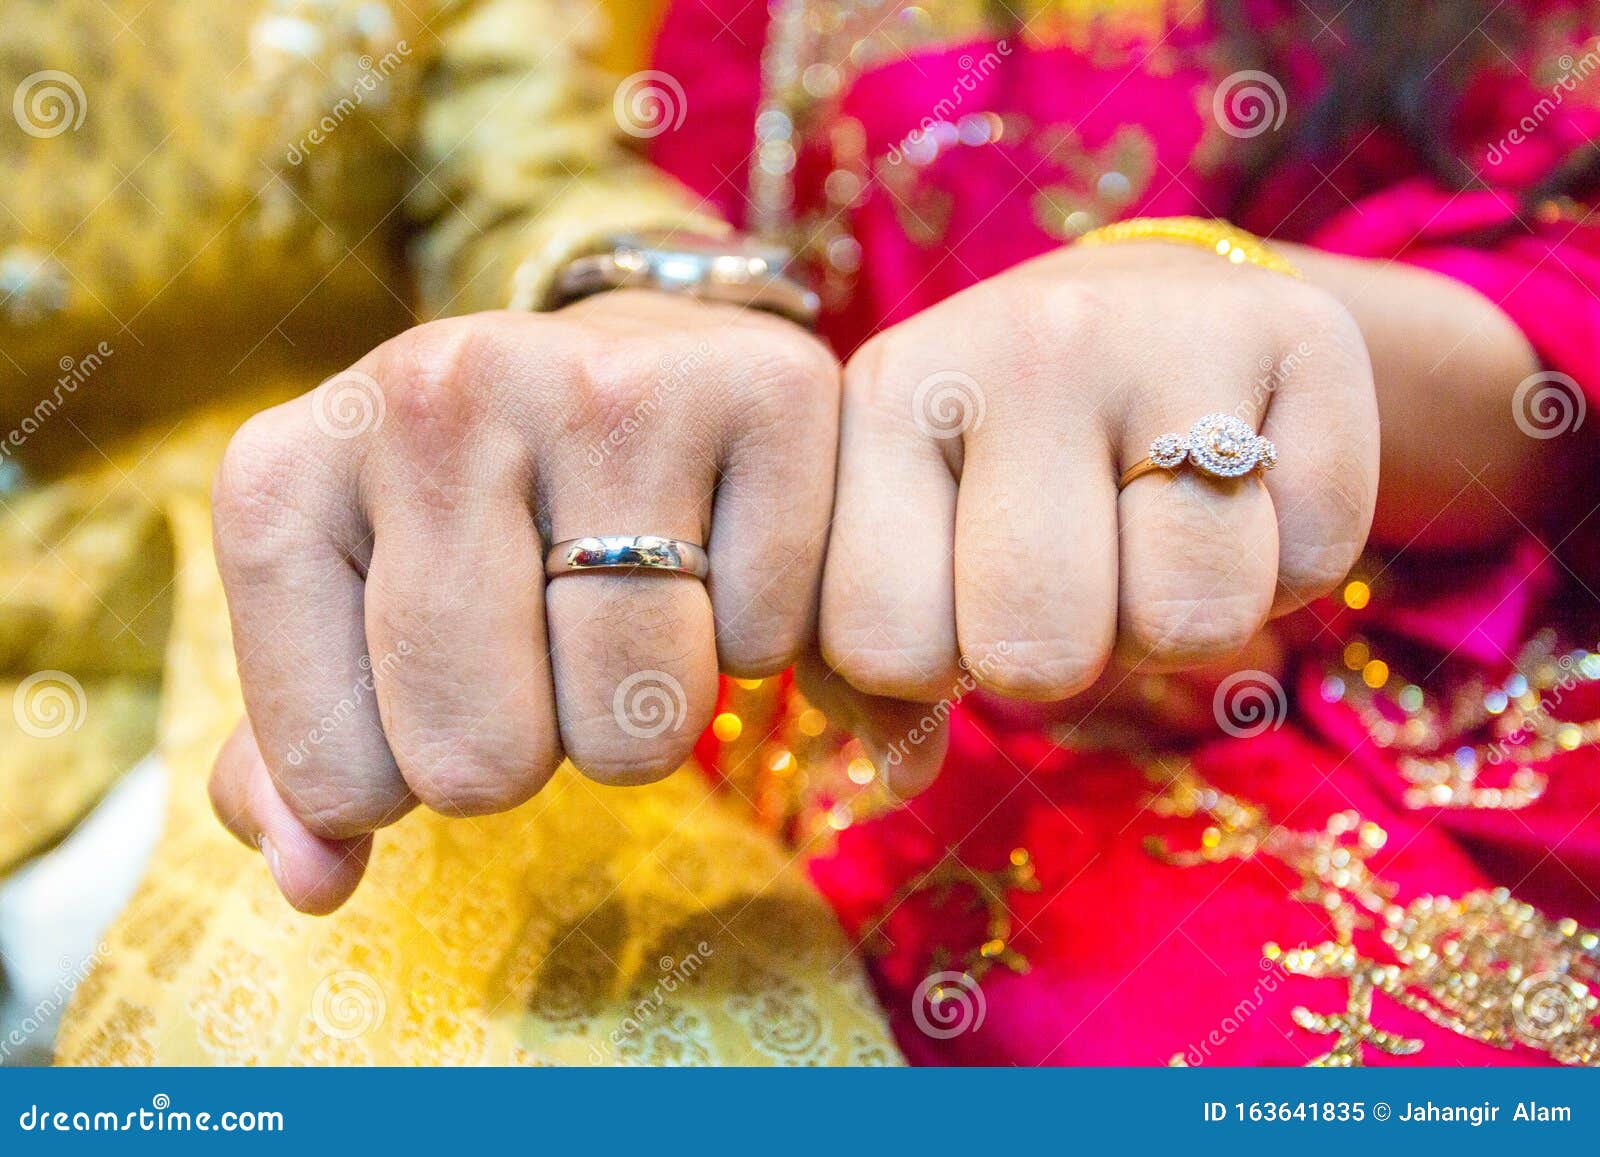 Married Couple Showing Their Wedding Rings at Bangladesh. Close Up ...